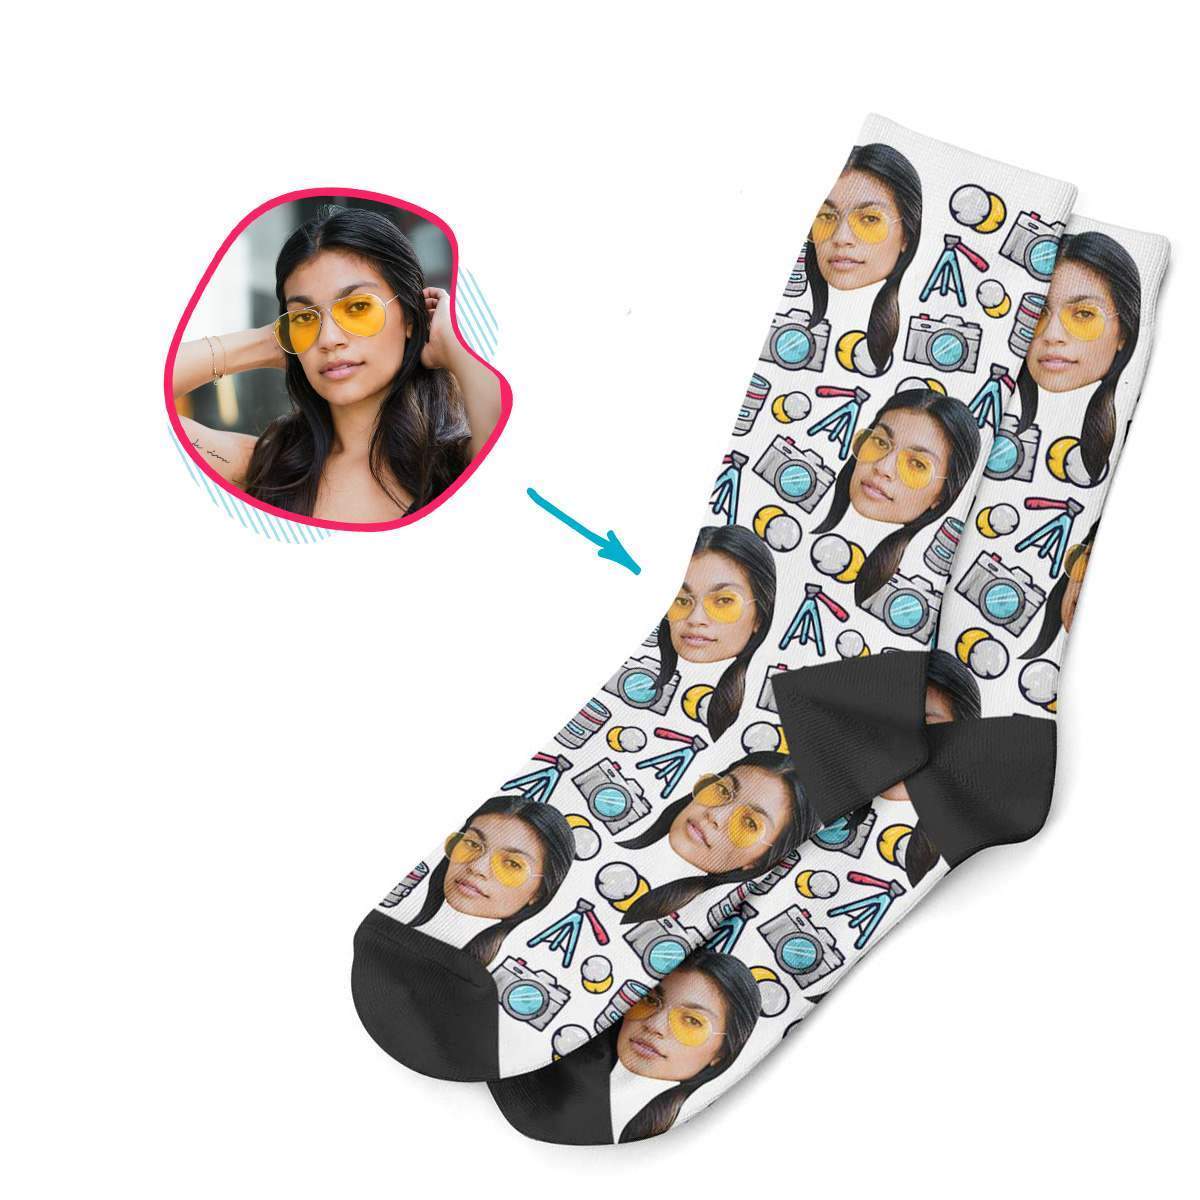 white Photography socks personalized with photo of face printed on them